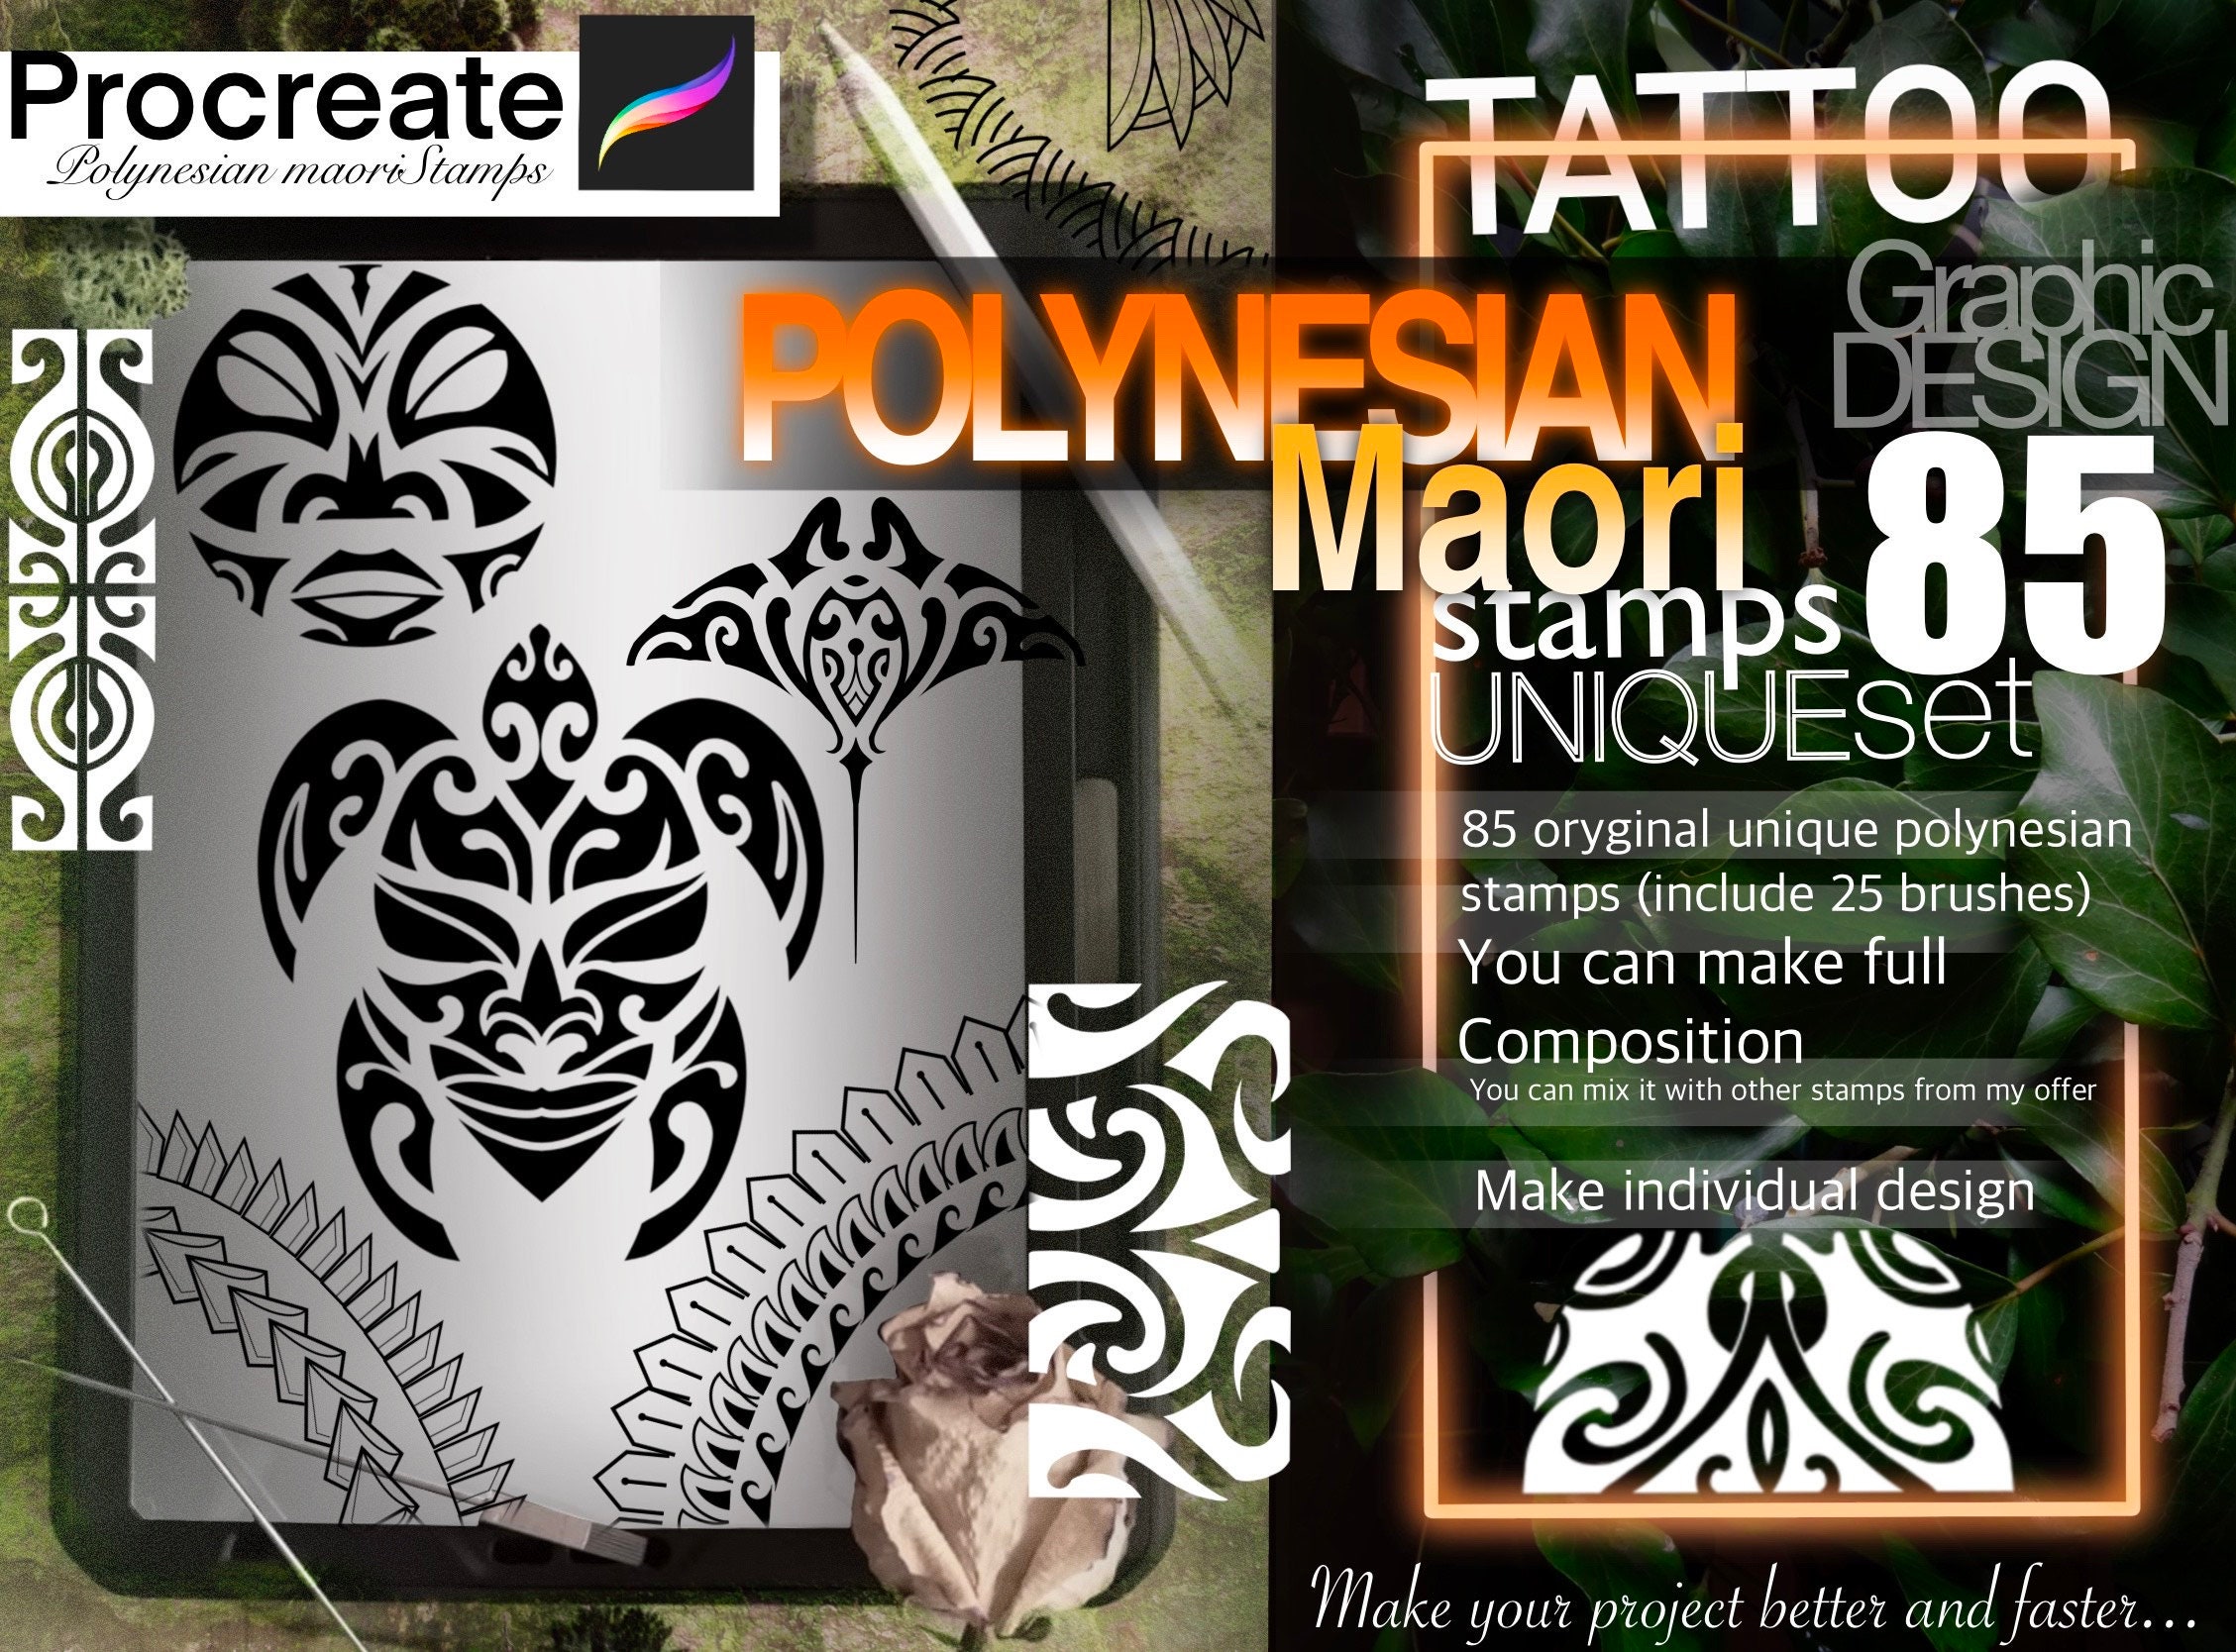 Page 9 - Free and customizable tattoo templates